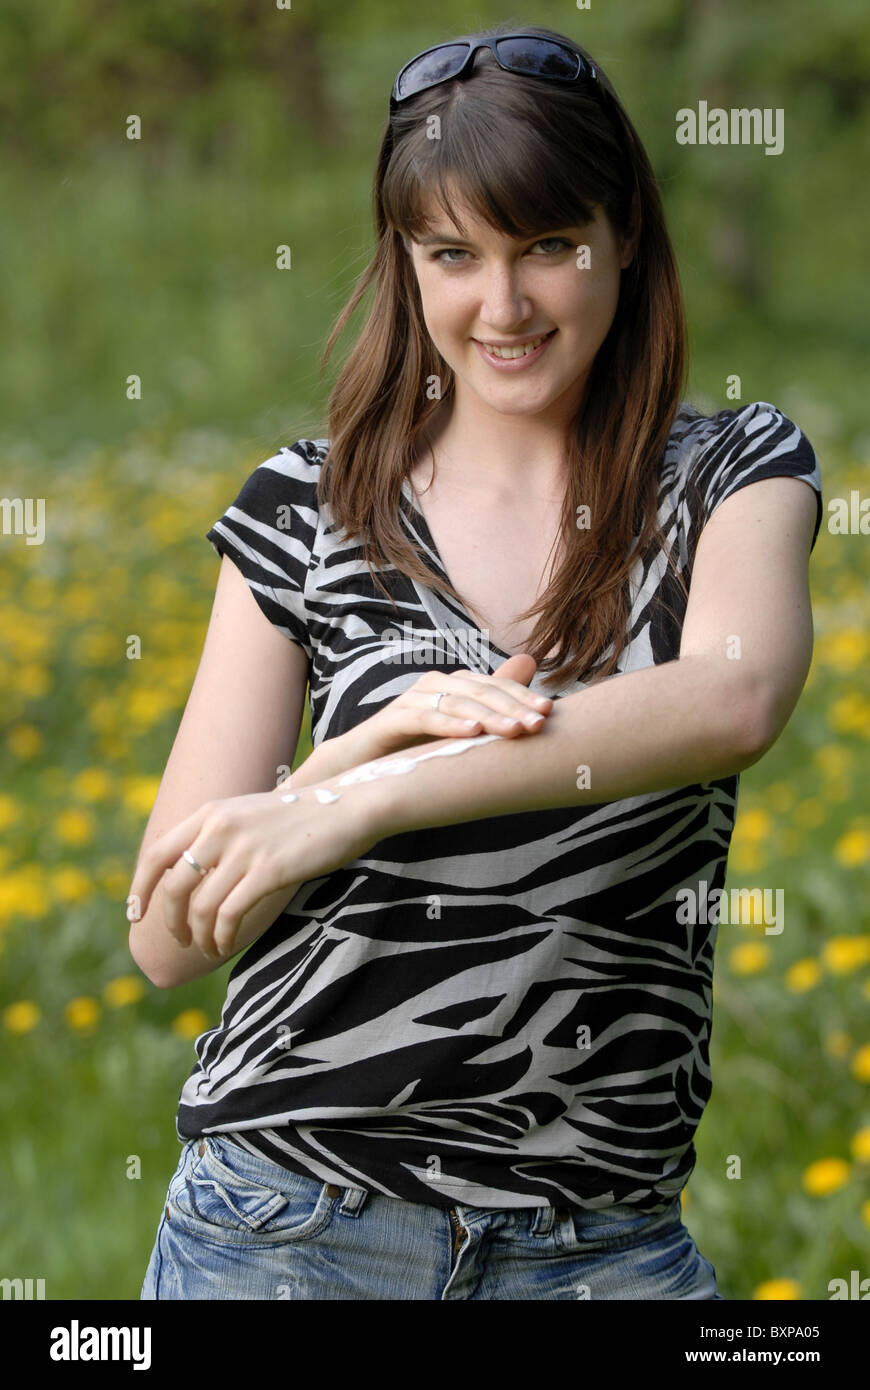 Young woman getting creamed Stock Photo